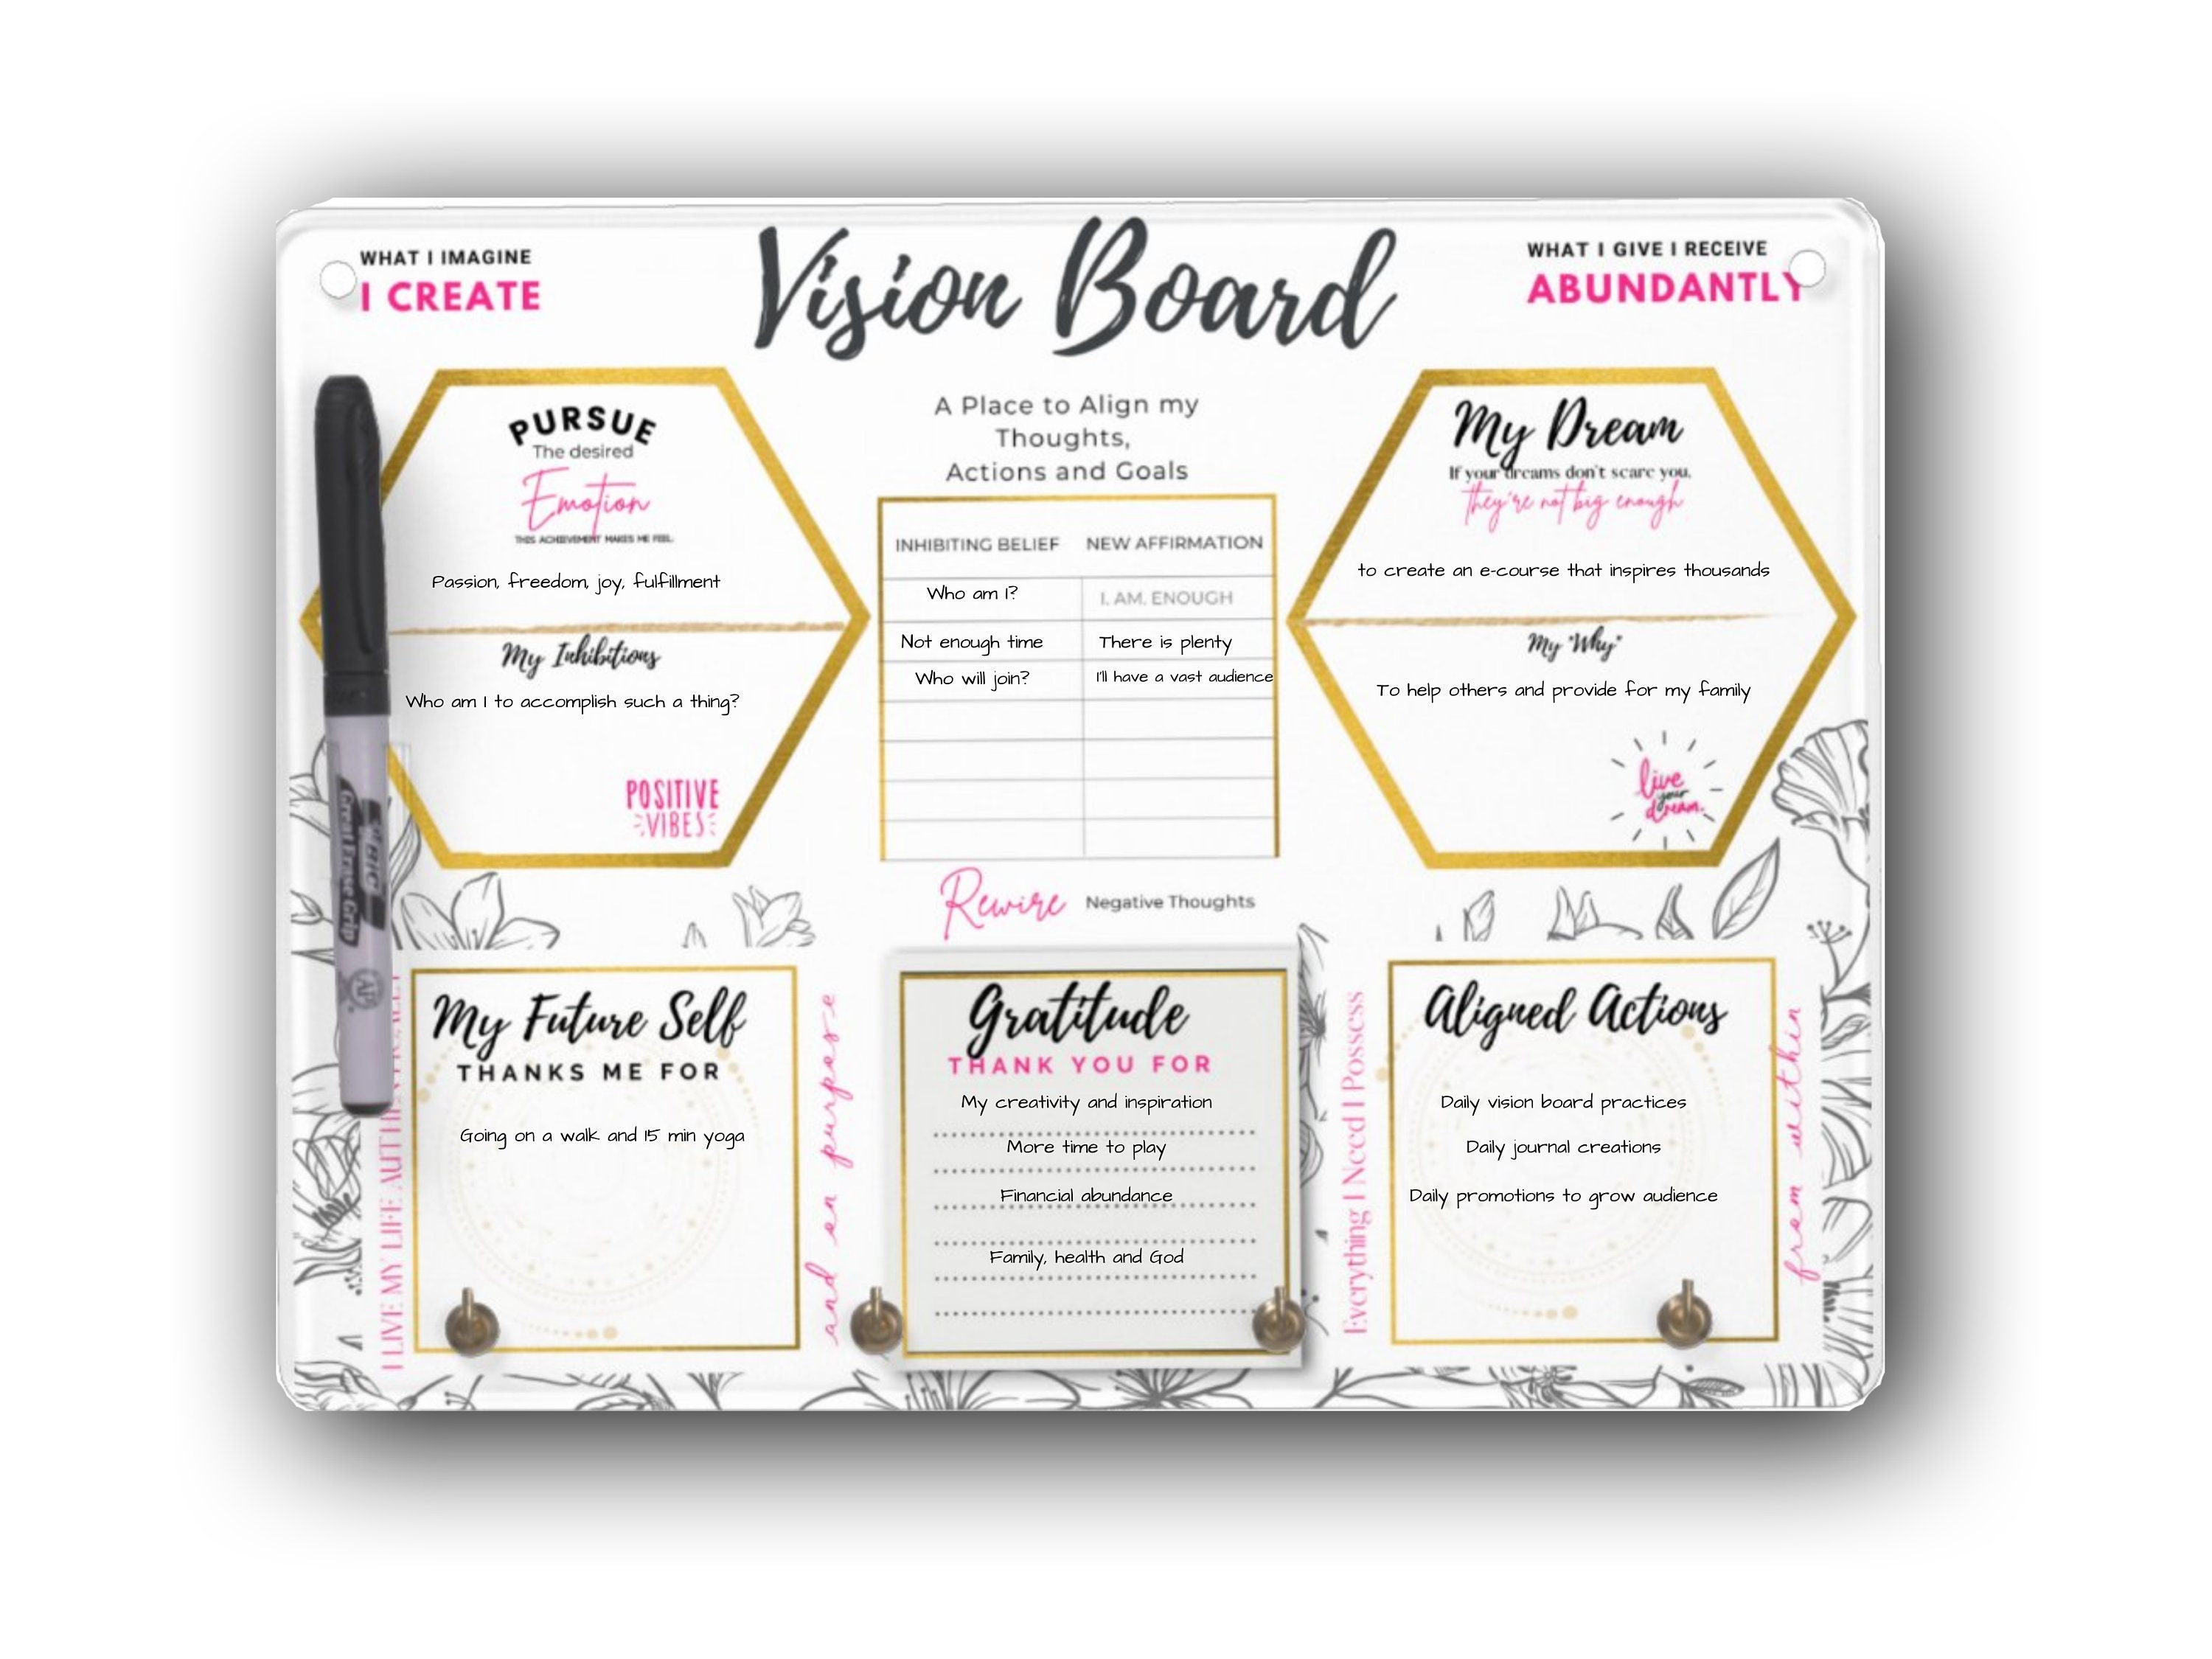 3 in 1 Vision Board: Decorative, Foldable, Dry Erase Vision Board kit with  200+ Motivational Stickers. 27 x 17 Board to Manifest Your Goals Using Law  of Attraction (Zoe)